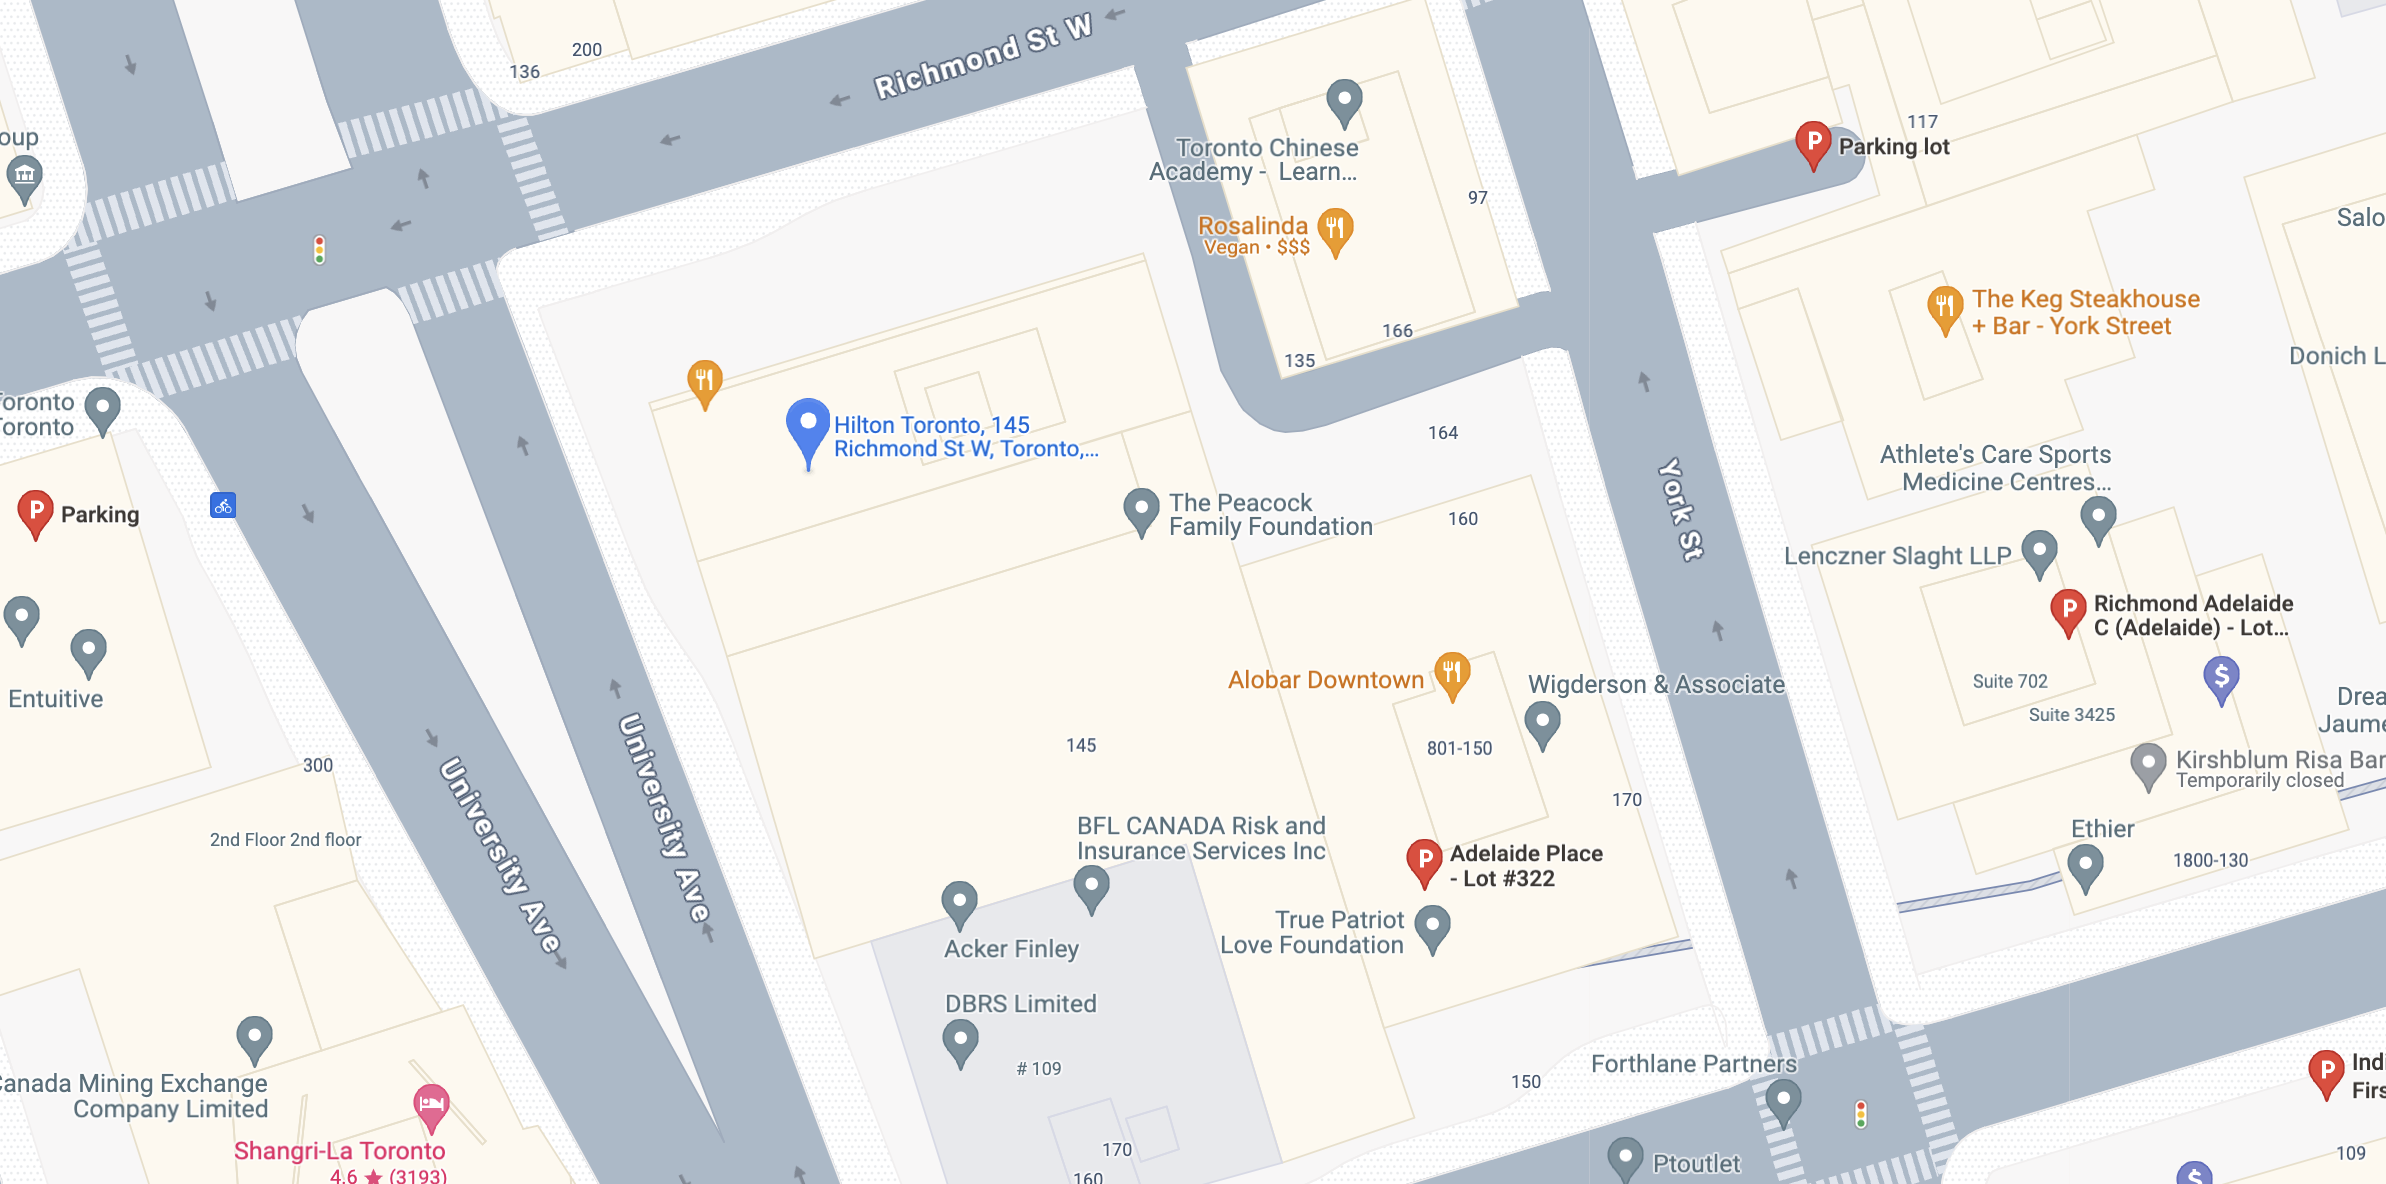 Map showing the location of the Hilton.